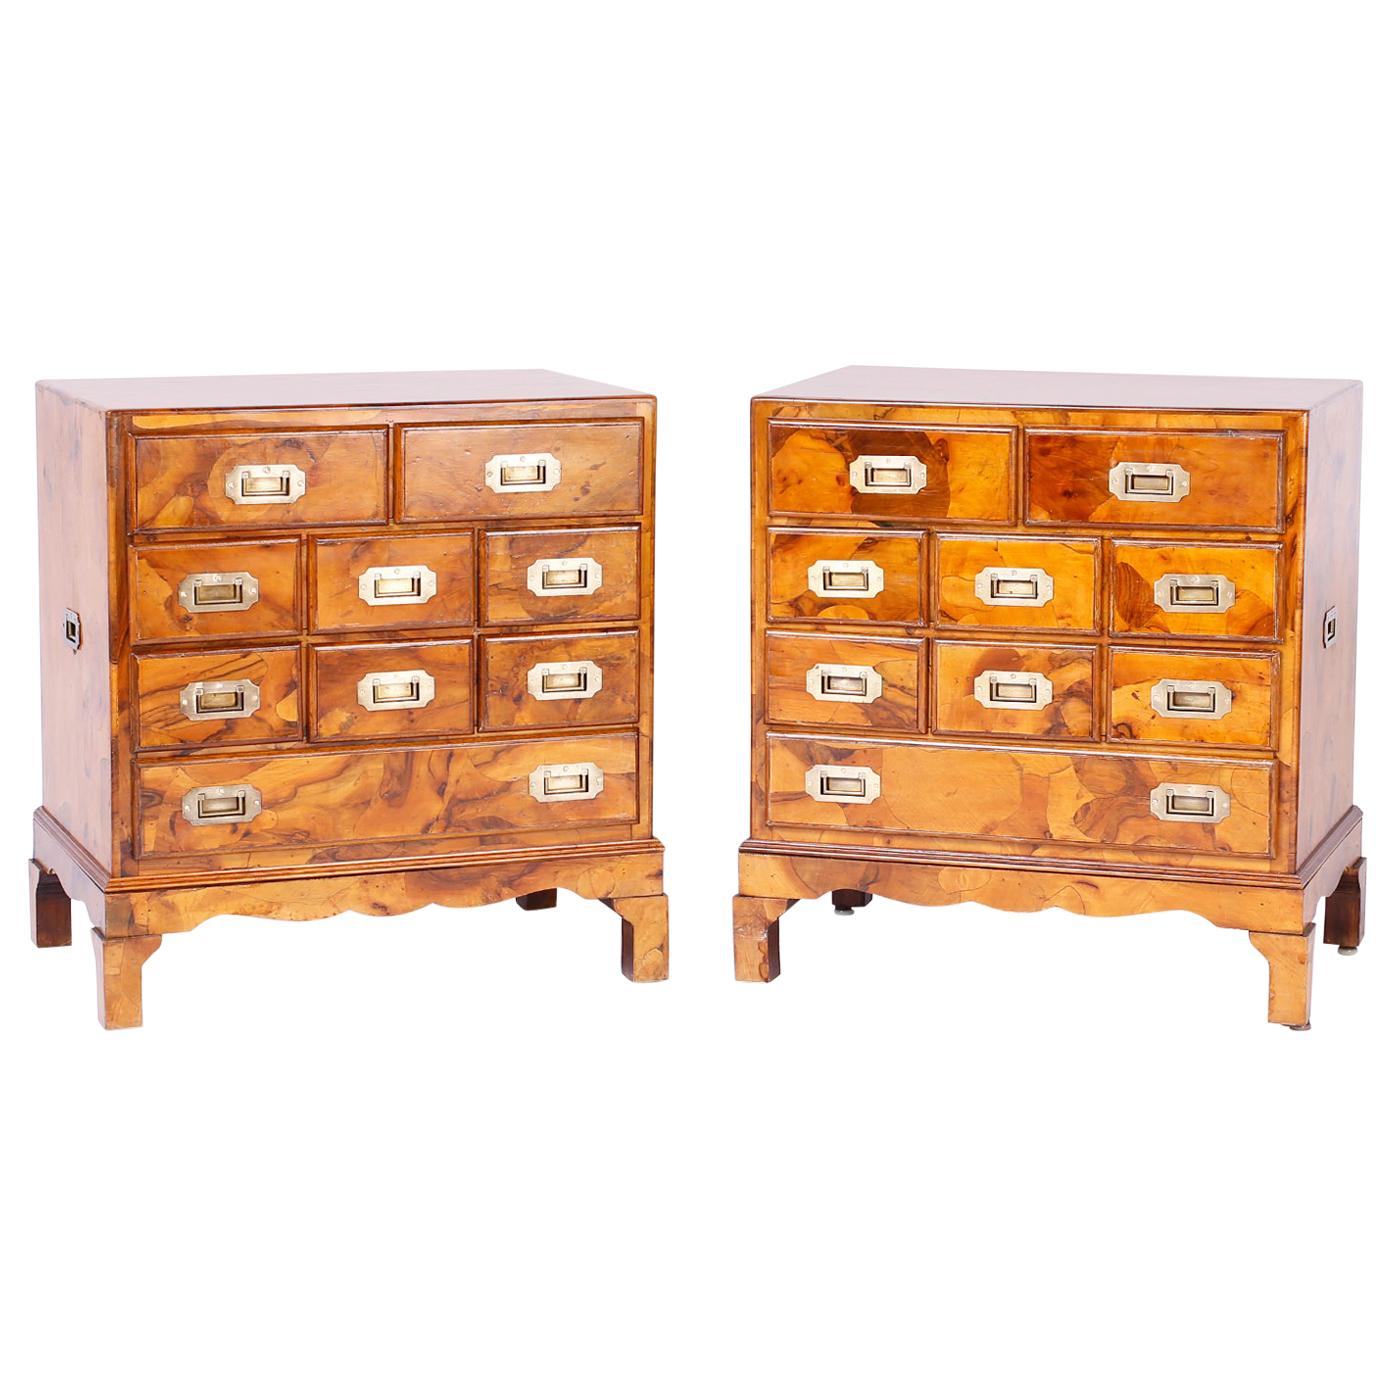 Pair of Burled Walnut Campaign Style Chests